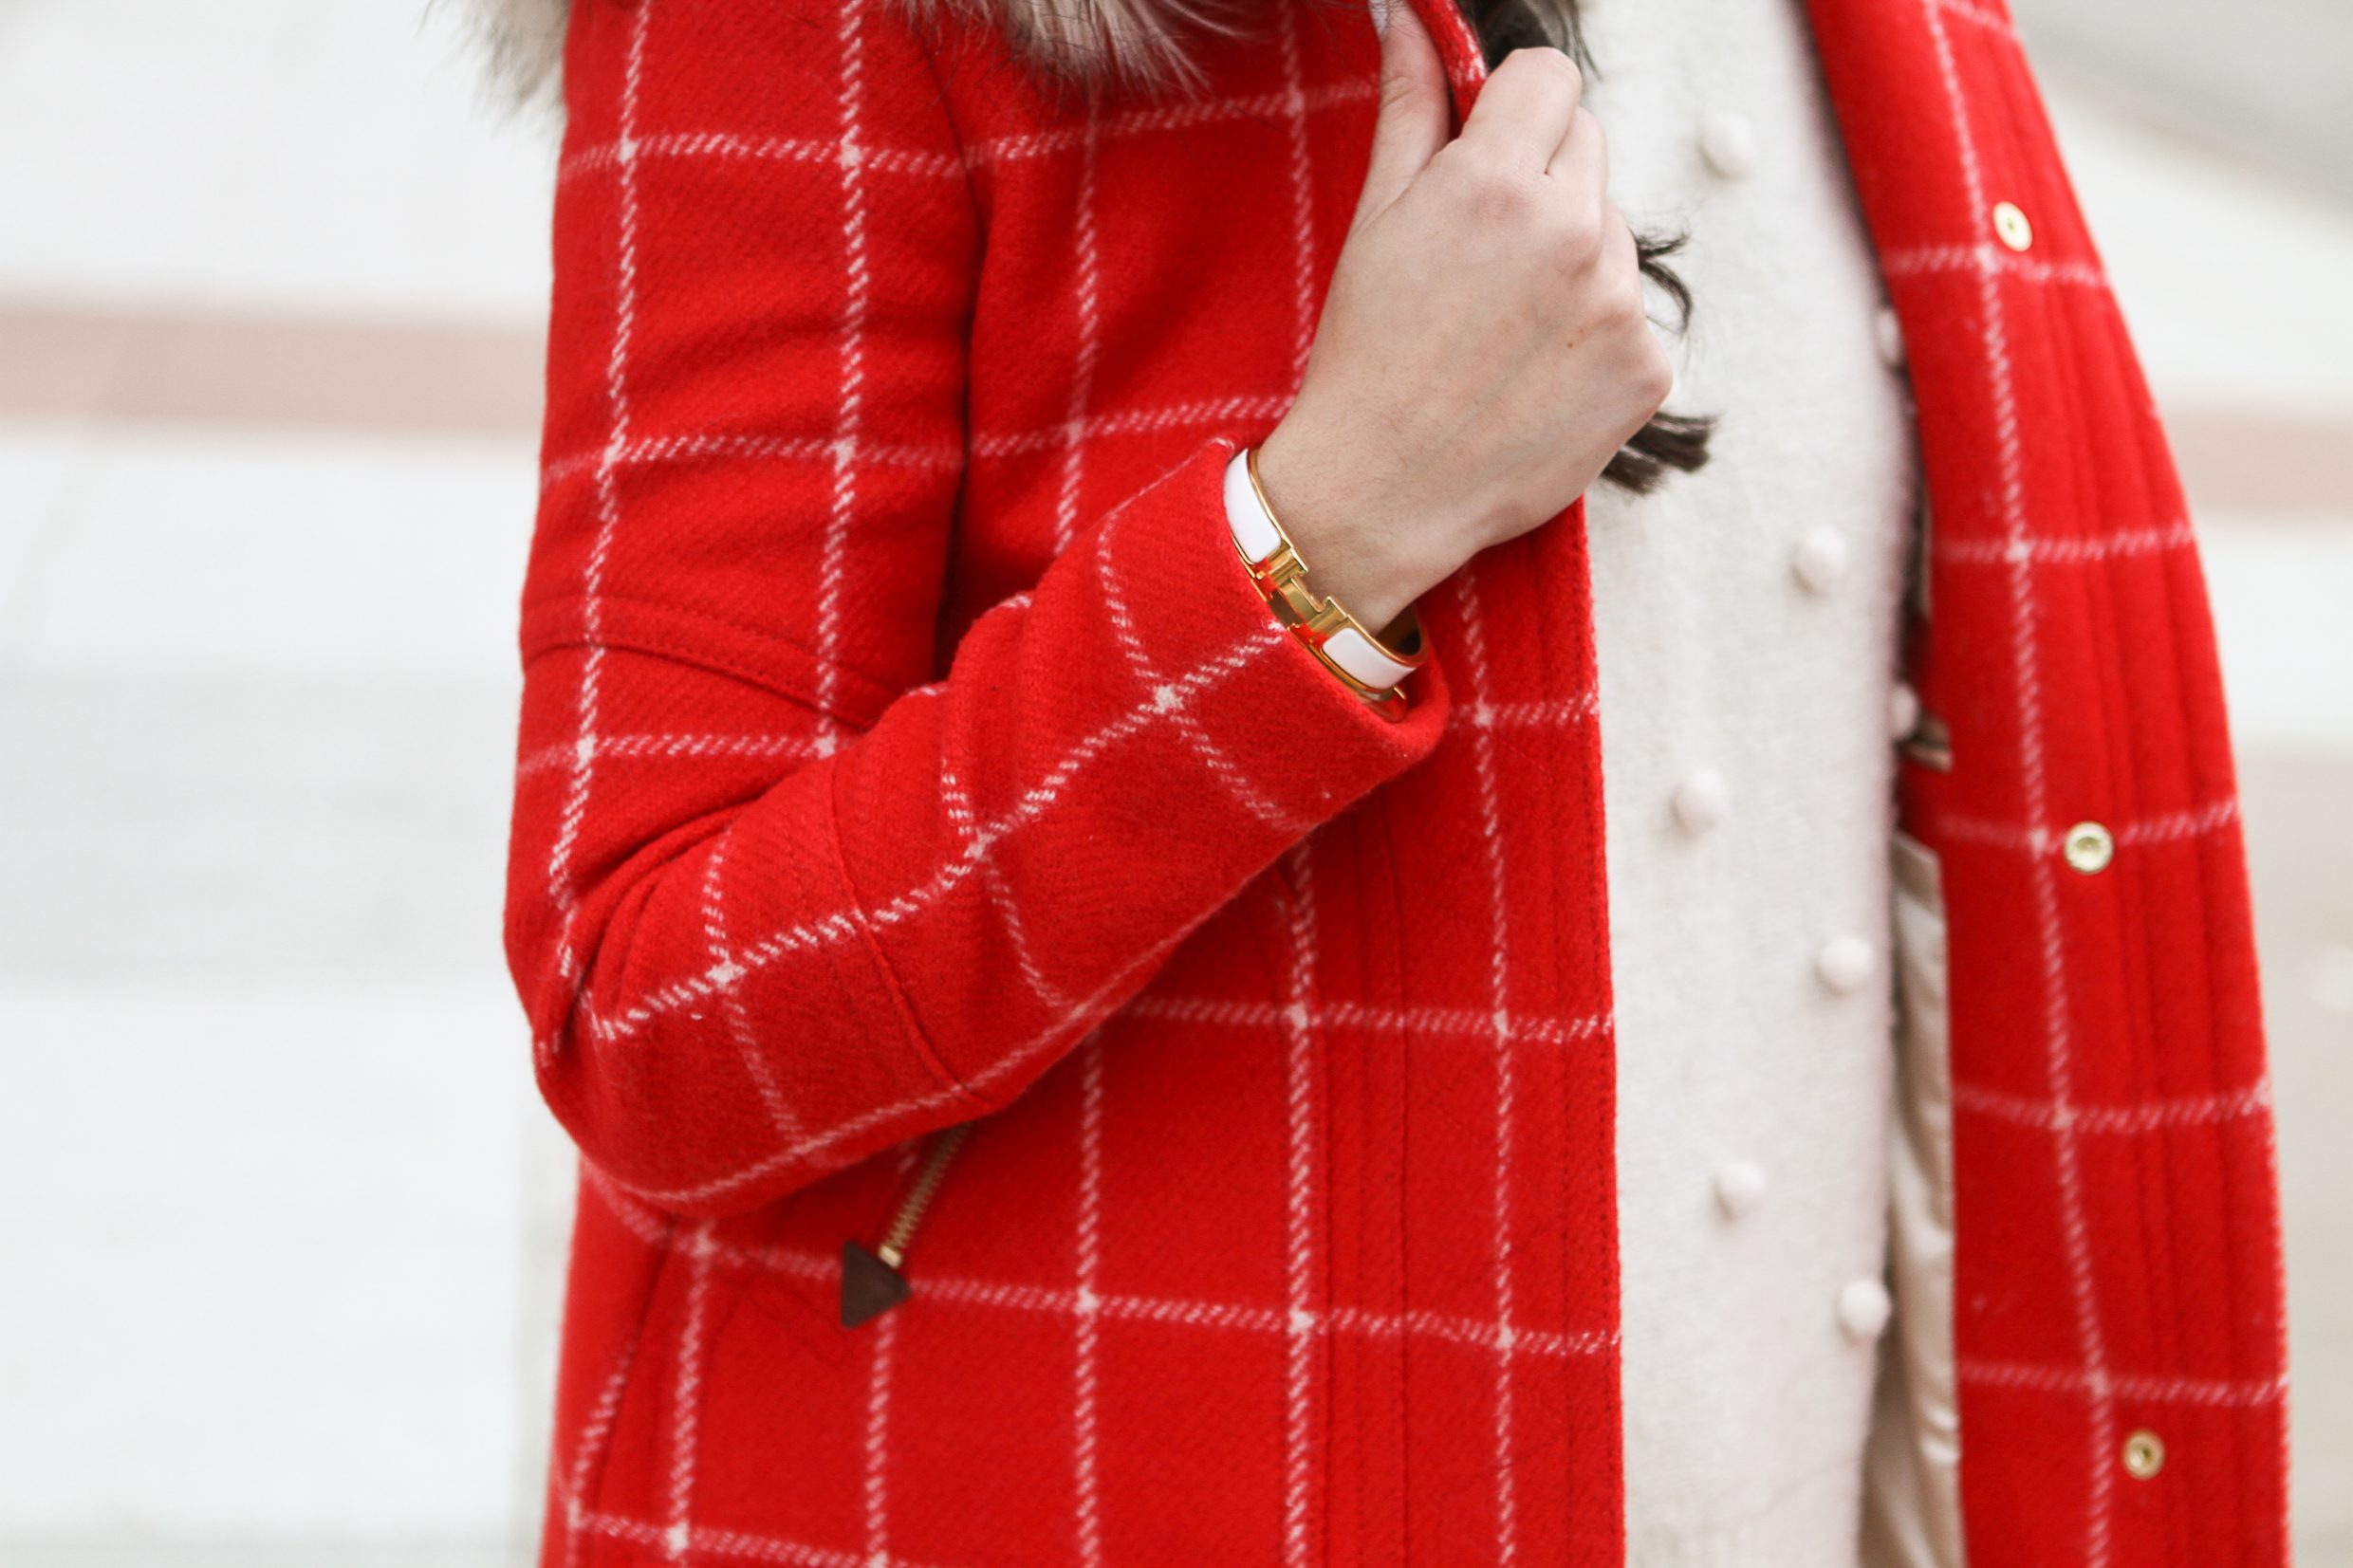 Home for the Holidays :: The Red Parka - Color & Chic